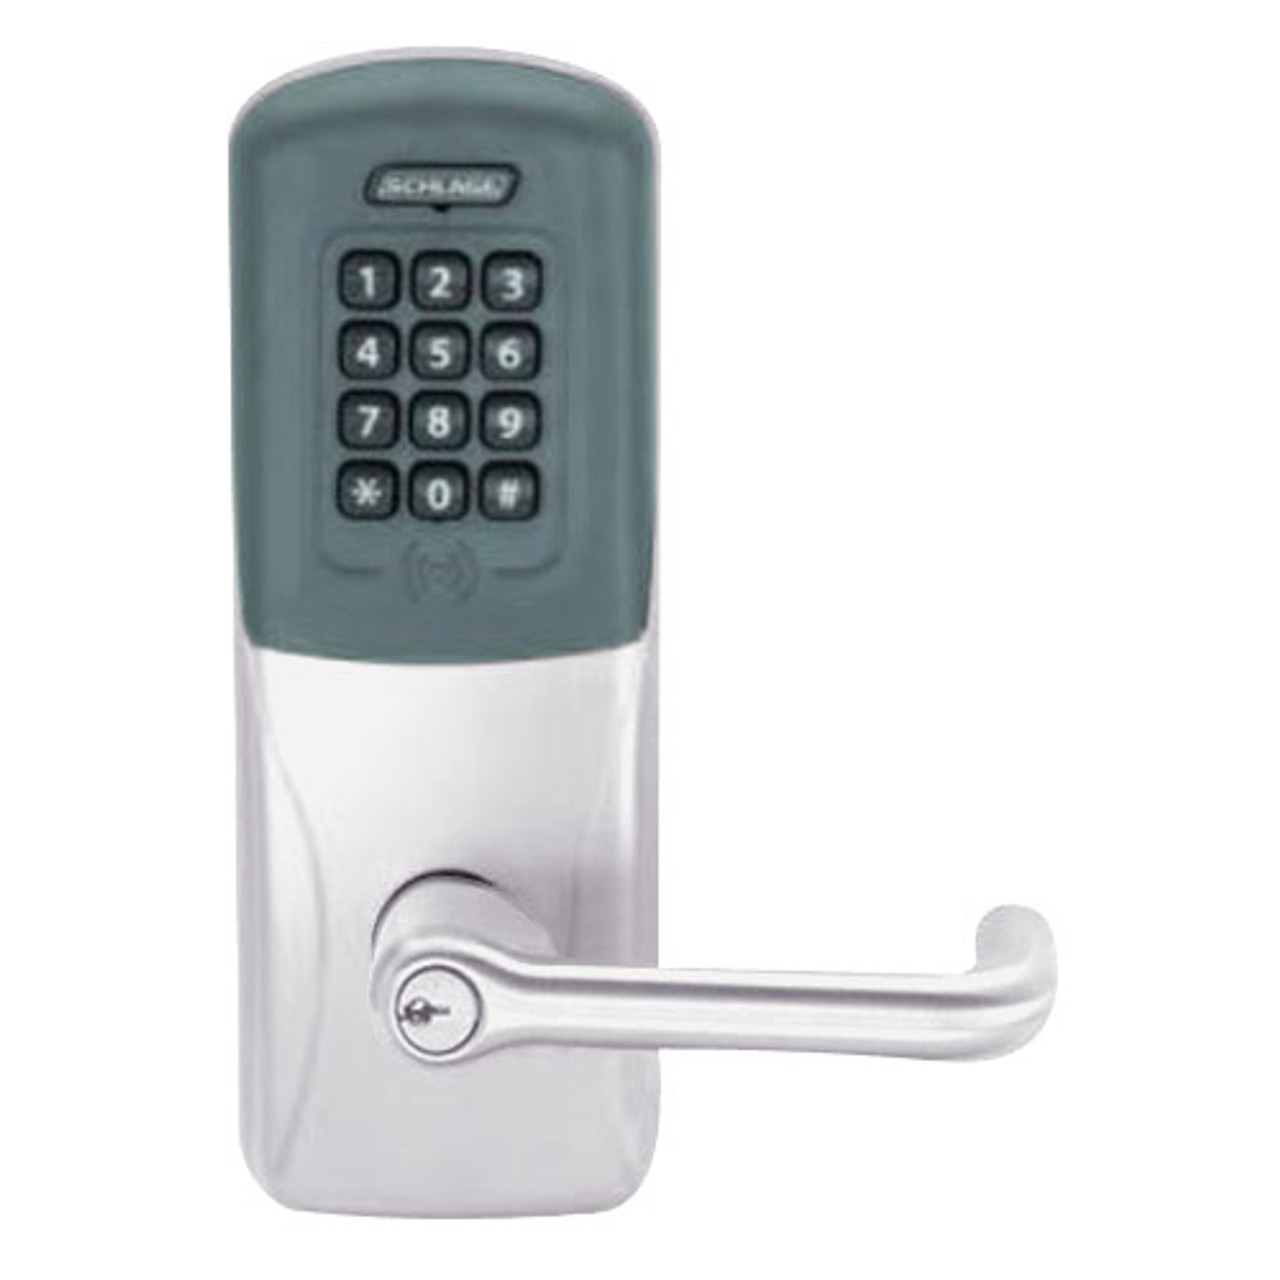 CO200-MD-40-PRK-TLR-PD-626 Mortise Deadbolt Standalone Electronic Proximity with Keypad Locks in Satin Chrome